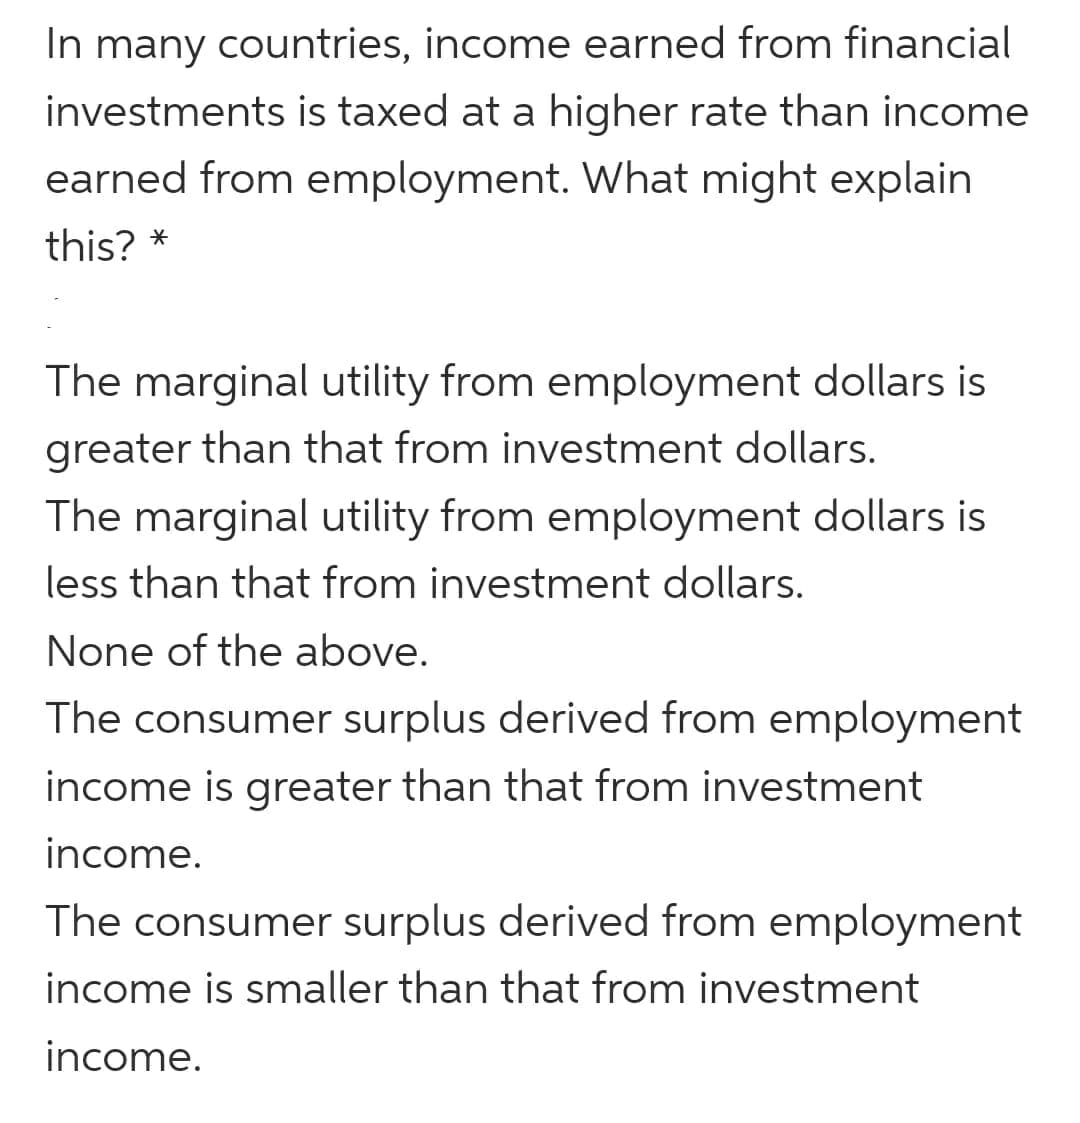 In many countries, income earned from financial
investments is taxed at a higher rate than income
earned from employment. What might explain
this? *
The marginal utility from employment dollars is
greater than that from investment dollars.
The marginal utility from employment dollars is
less than that from investment dollars.
None of the above.
The consumer surplus derived from employment
income is greater than that from investment
income.
The consumer surplus derived from employment
income is smaller than that from investment
income.
